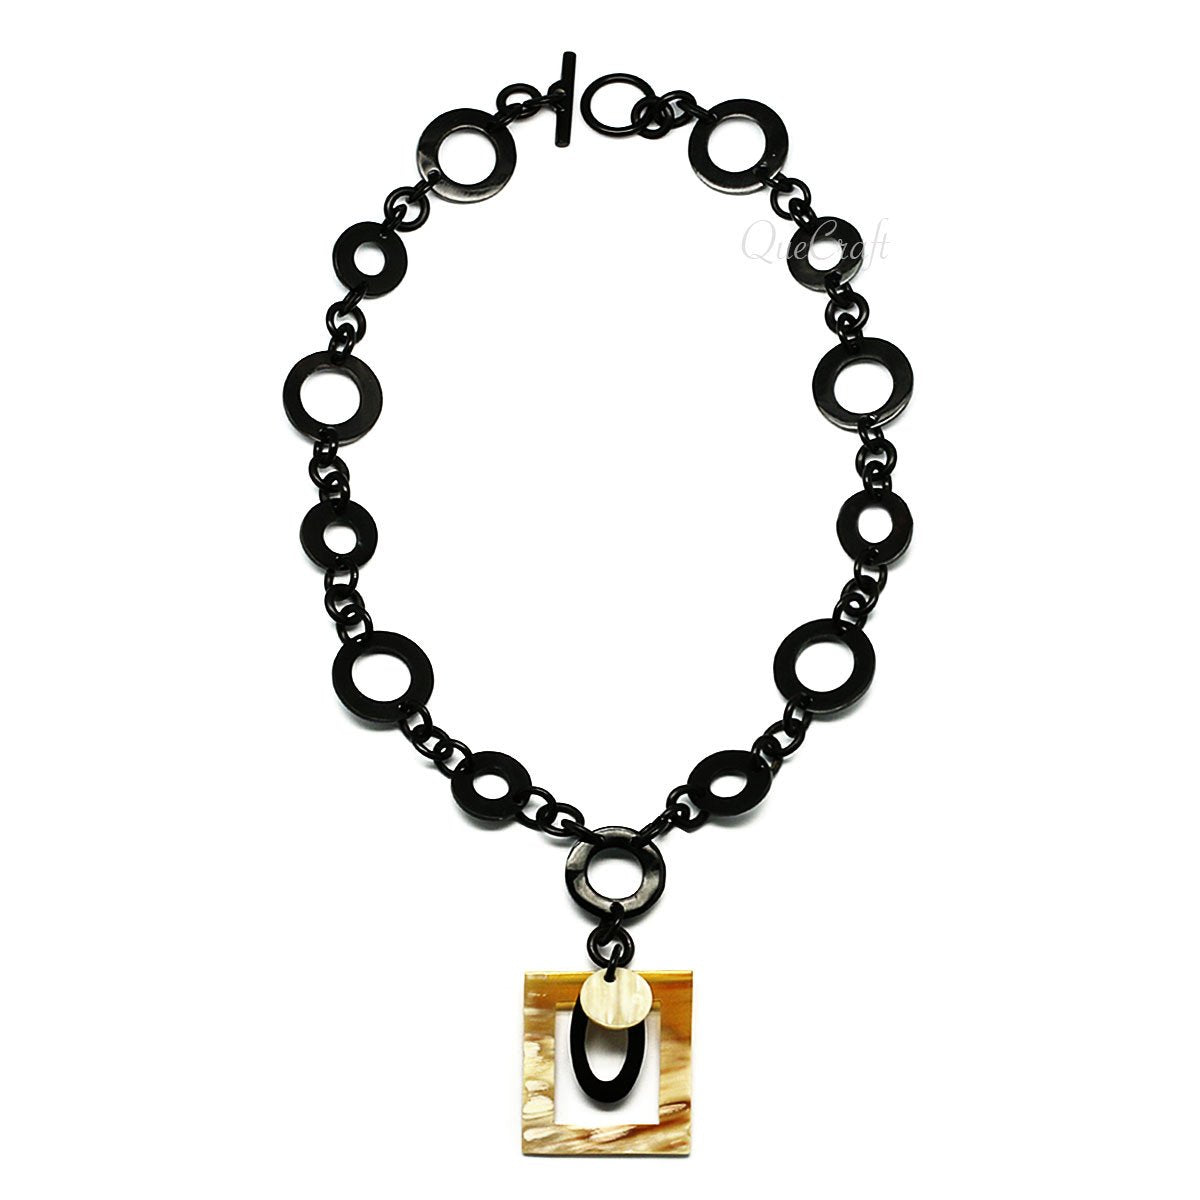 Horn Chain Necklace #4199 - HORN JEWELRY